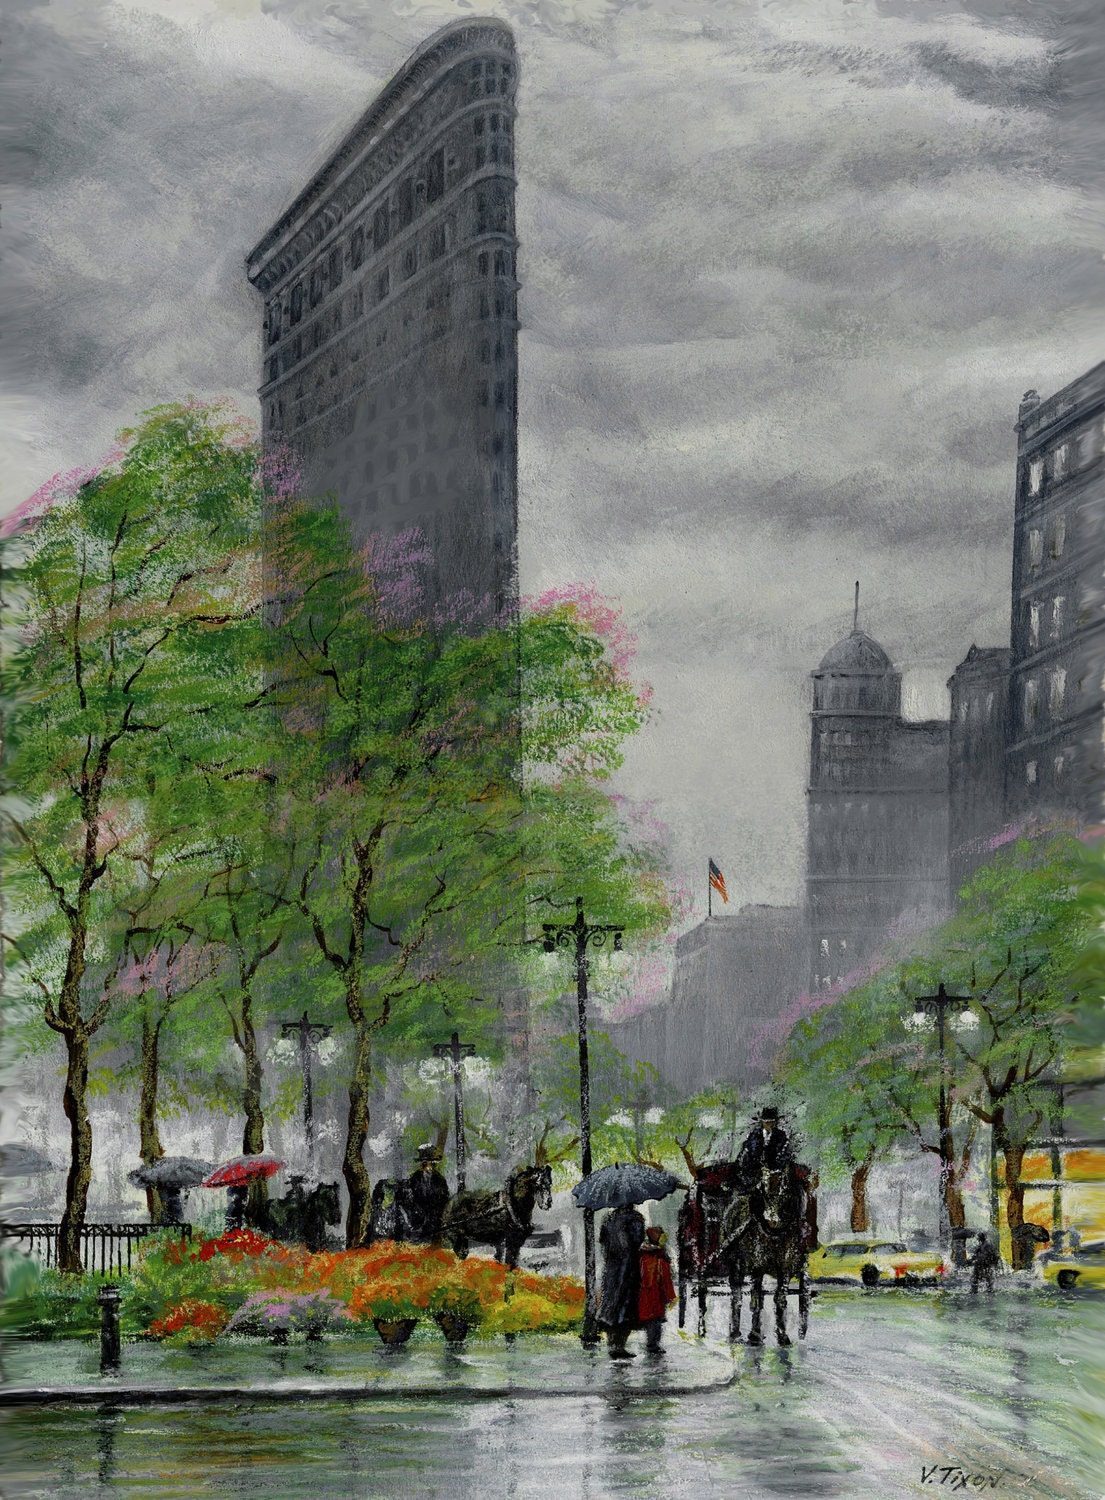 New York. The Flatiron Building. Painting on Giclee Canvas